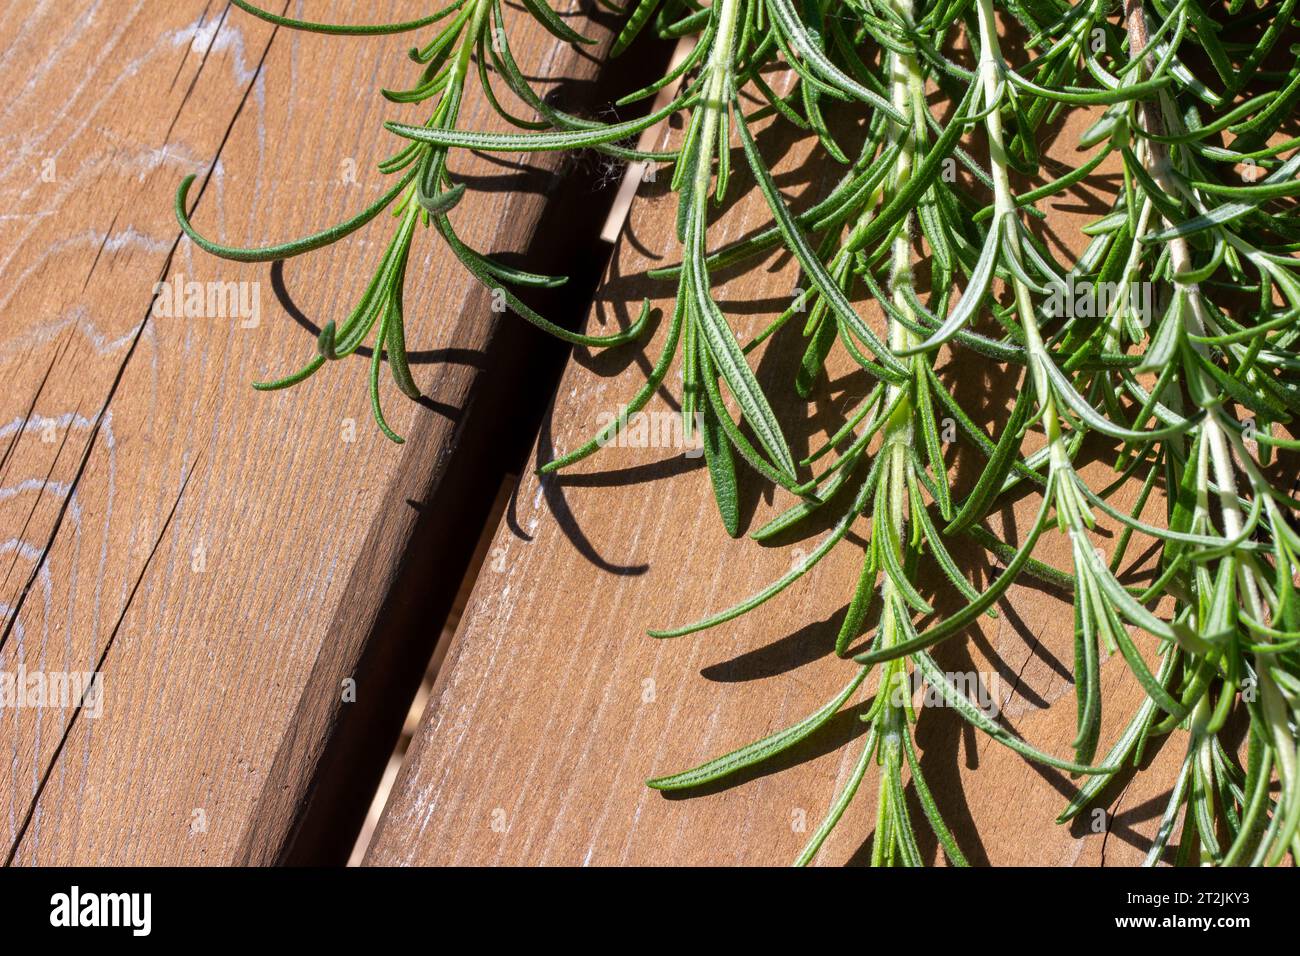 Full frame macro texture view of sprigs of rosemary herb needle leaves on a cedar wood plank background Stock Photo